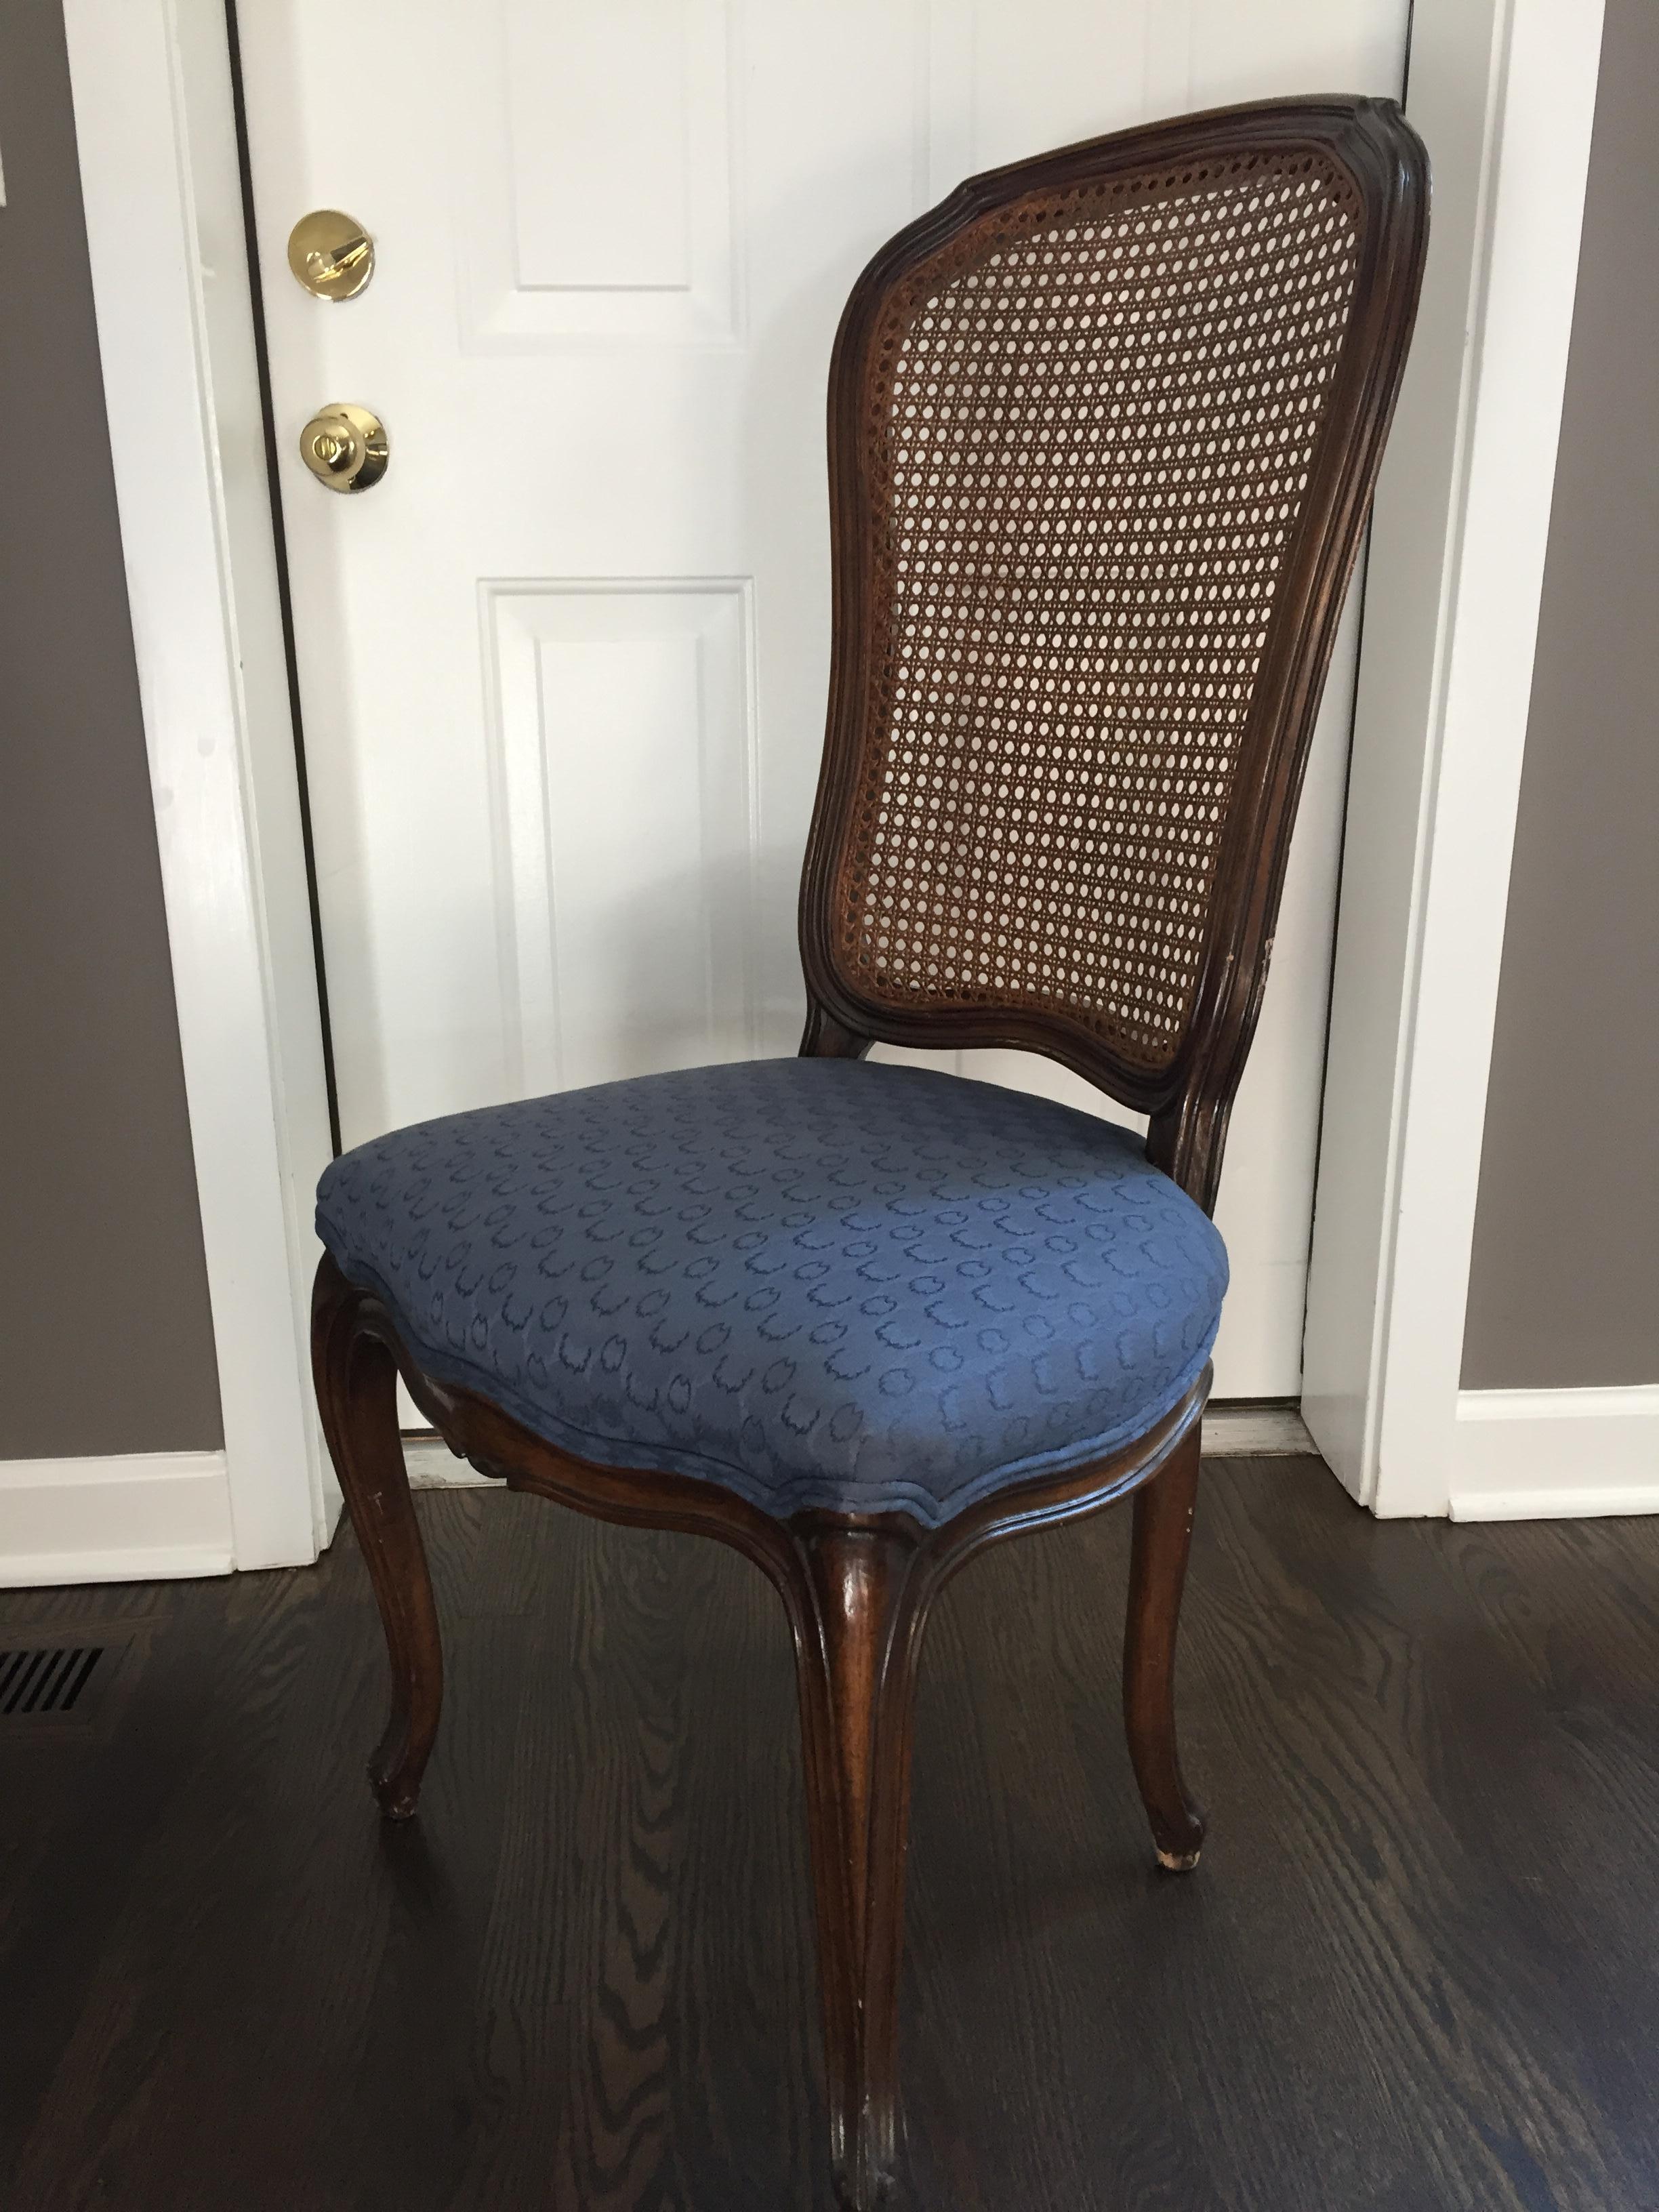 Midcentury 1950s vintage caned back chair.
Vintage mahogany chair that has an upholstered seat and re-caned back. The piece is from the 1950s.
There are two available
Price is for each.

Dimensions: 29